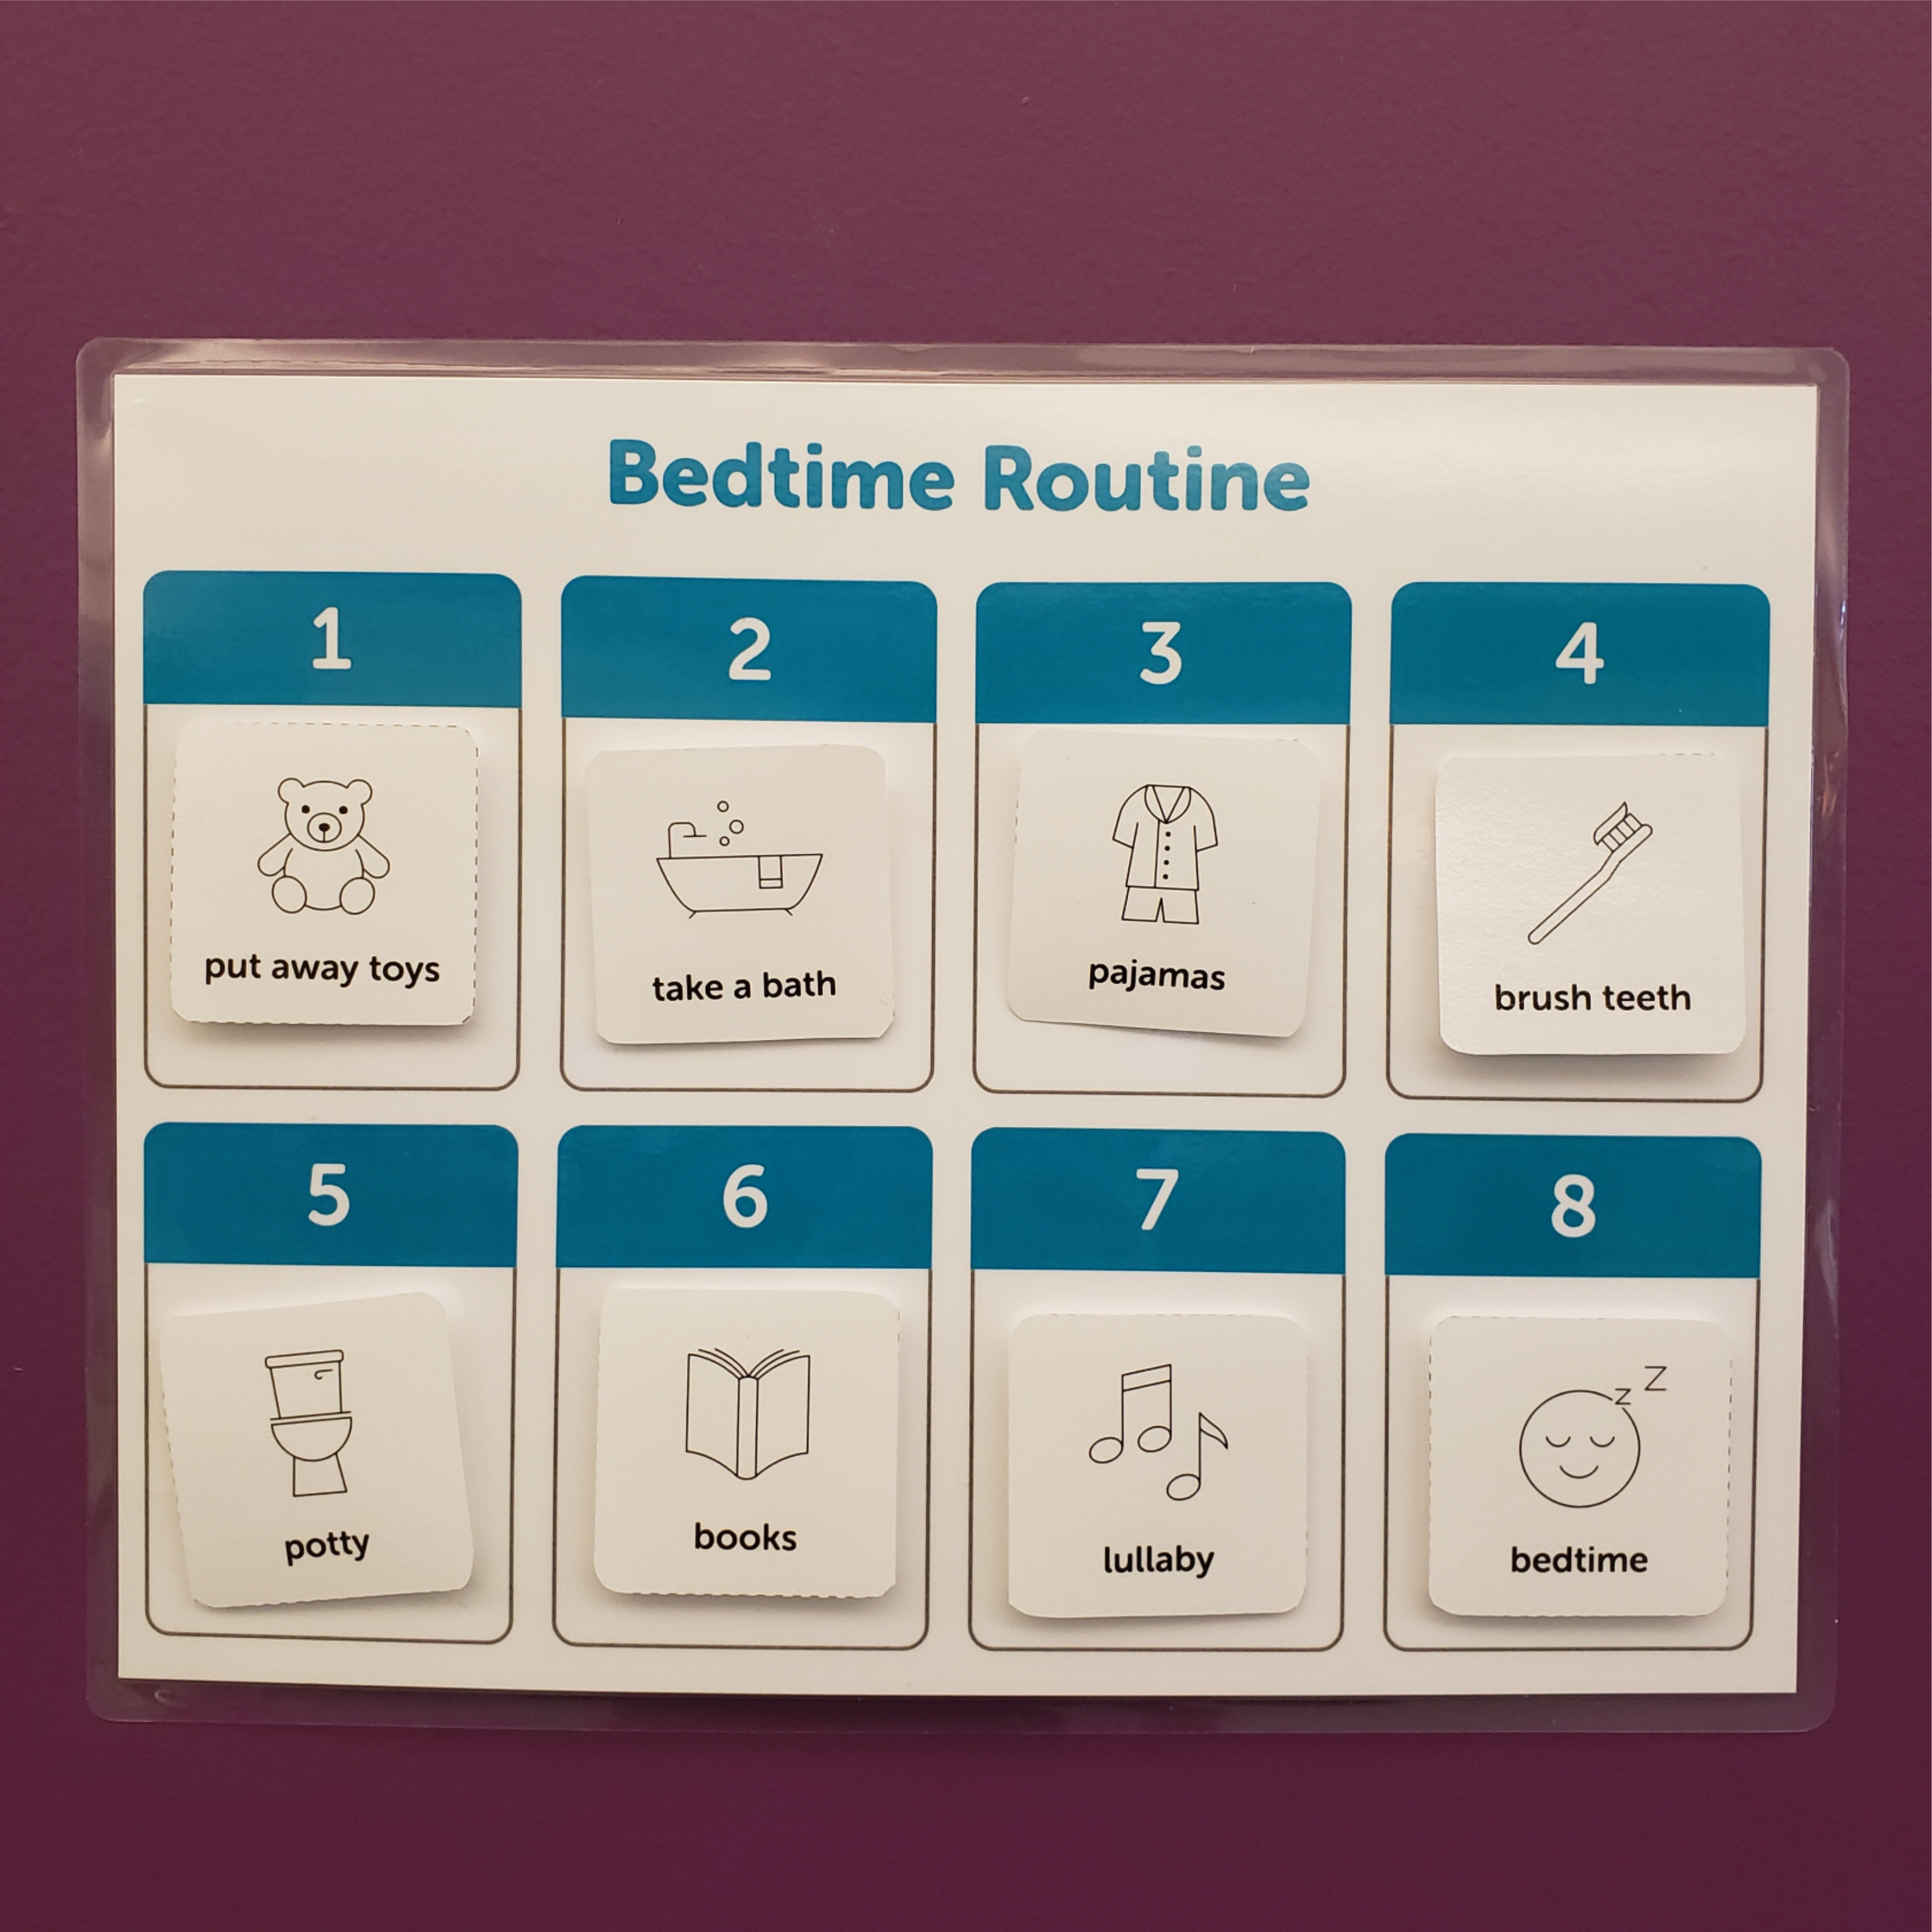 Bedtime routine board with bedtime tasks